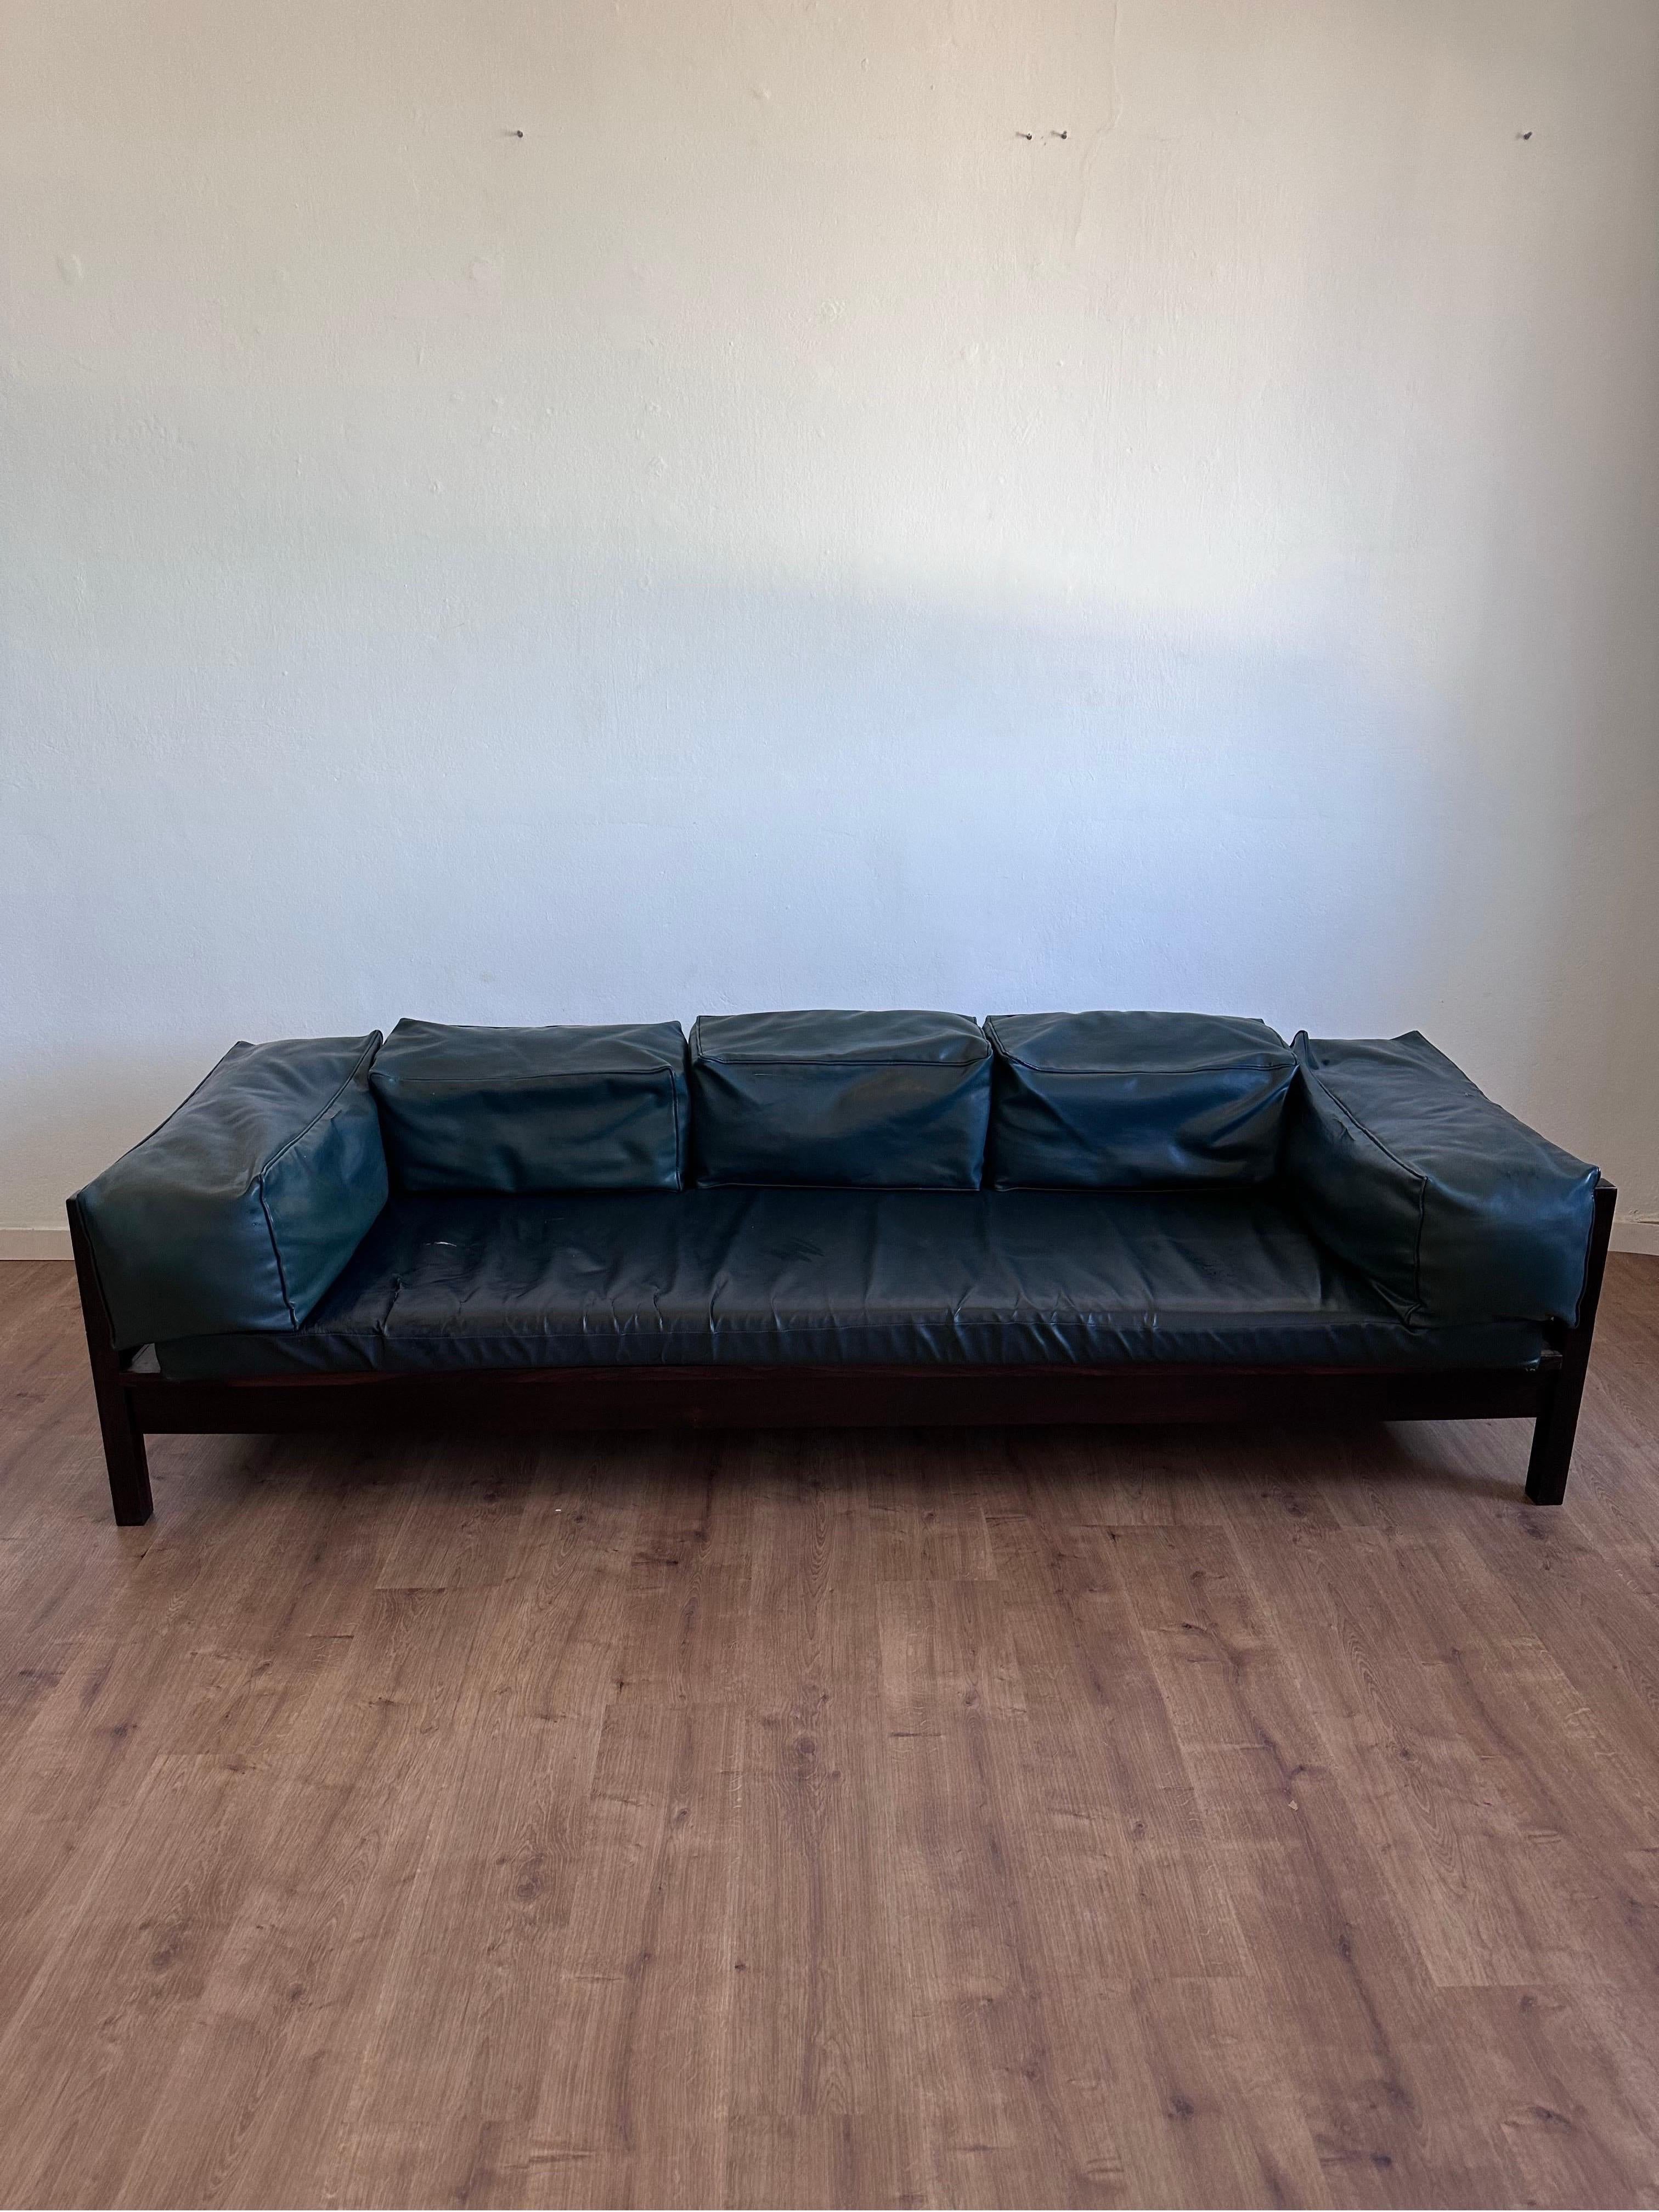 Mid-century Brazilian modern jacaranda rosewood three seat sofa with original fabric by Celina Decorações.  New upholstery is recommended.

Ships from Rio De Janeiro.